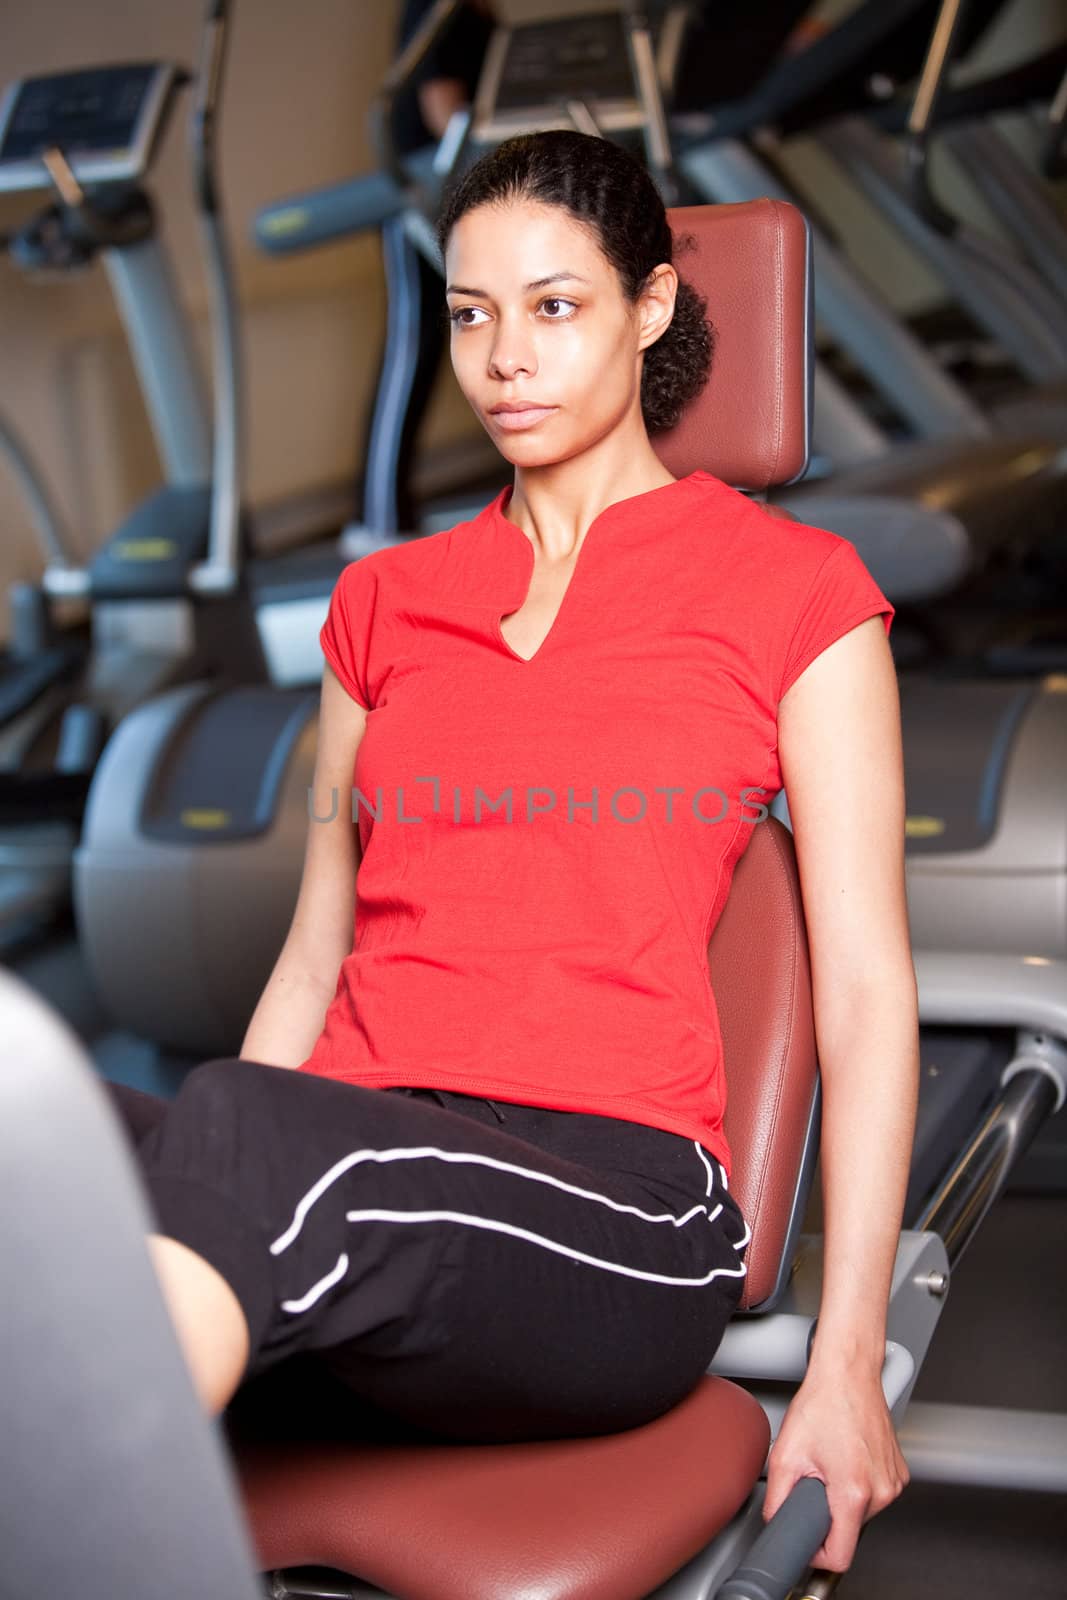 Beautiful girl at the machines in the gym working out